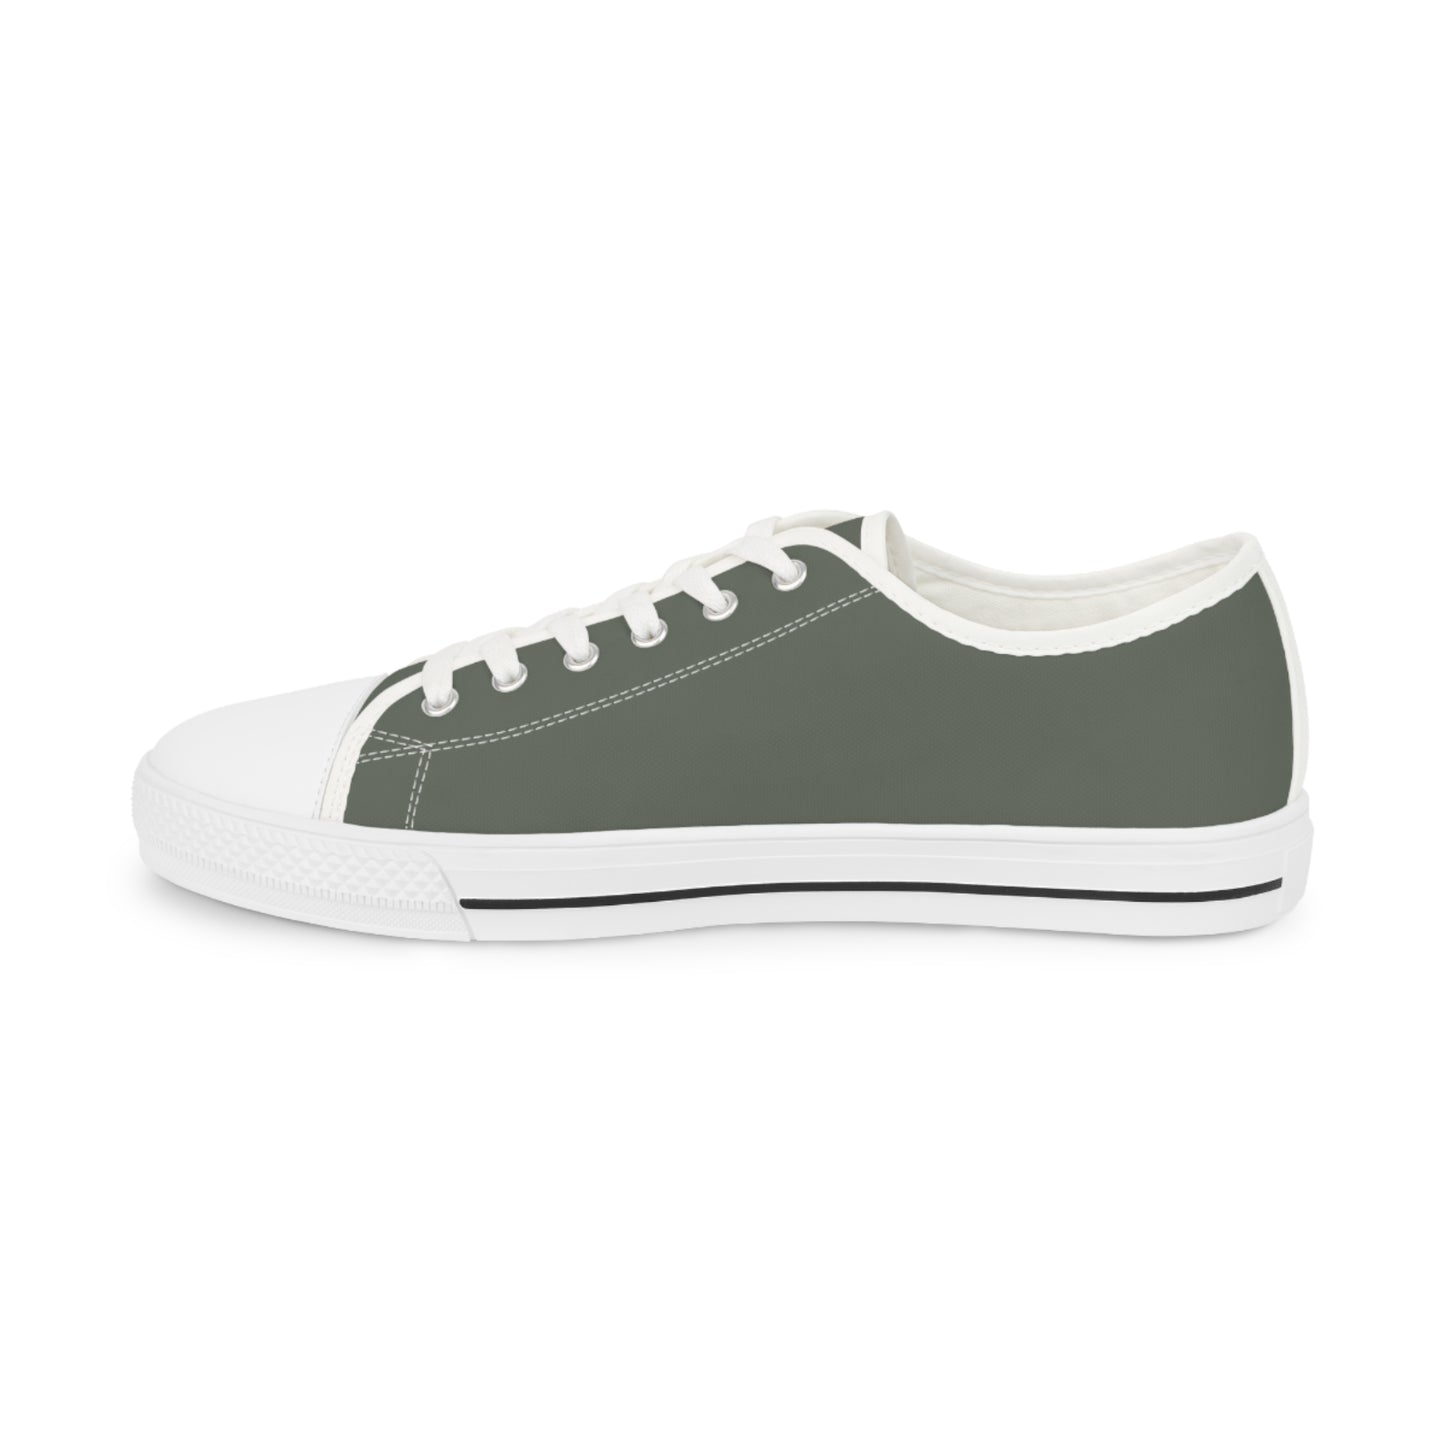 Men's Canvas Low Top Solid Color Sneakers - Drab Olive Gray US 14 Black sole